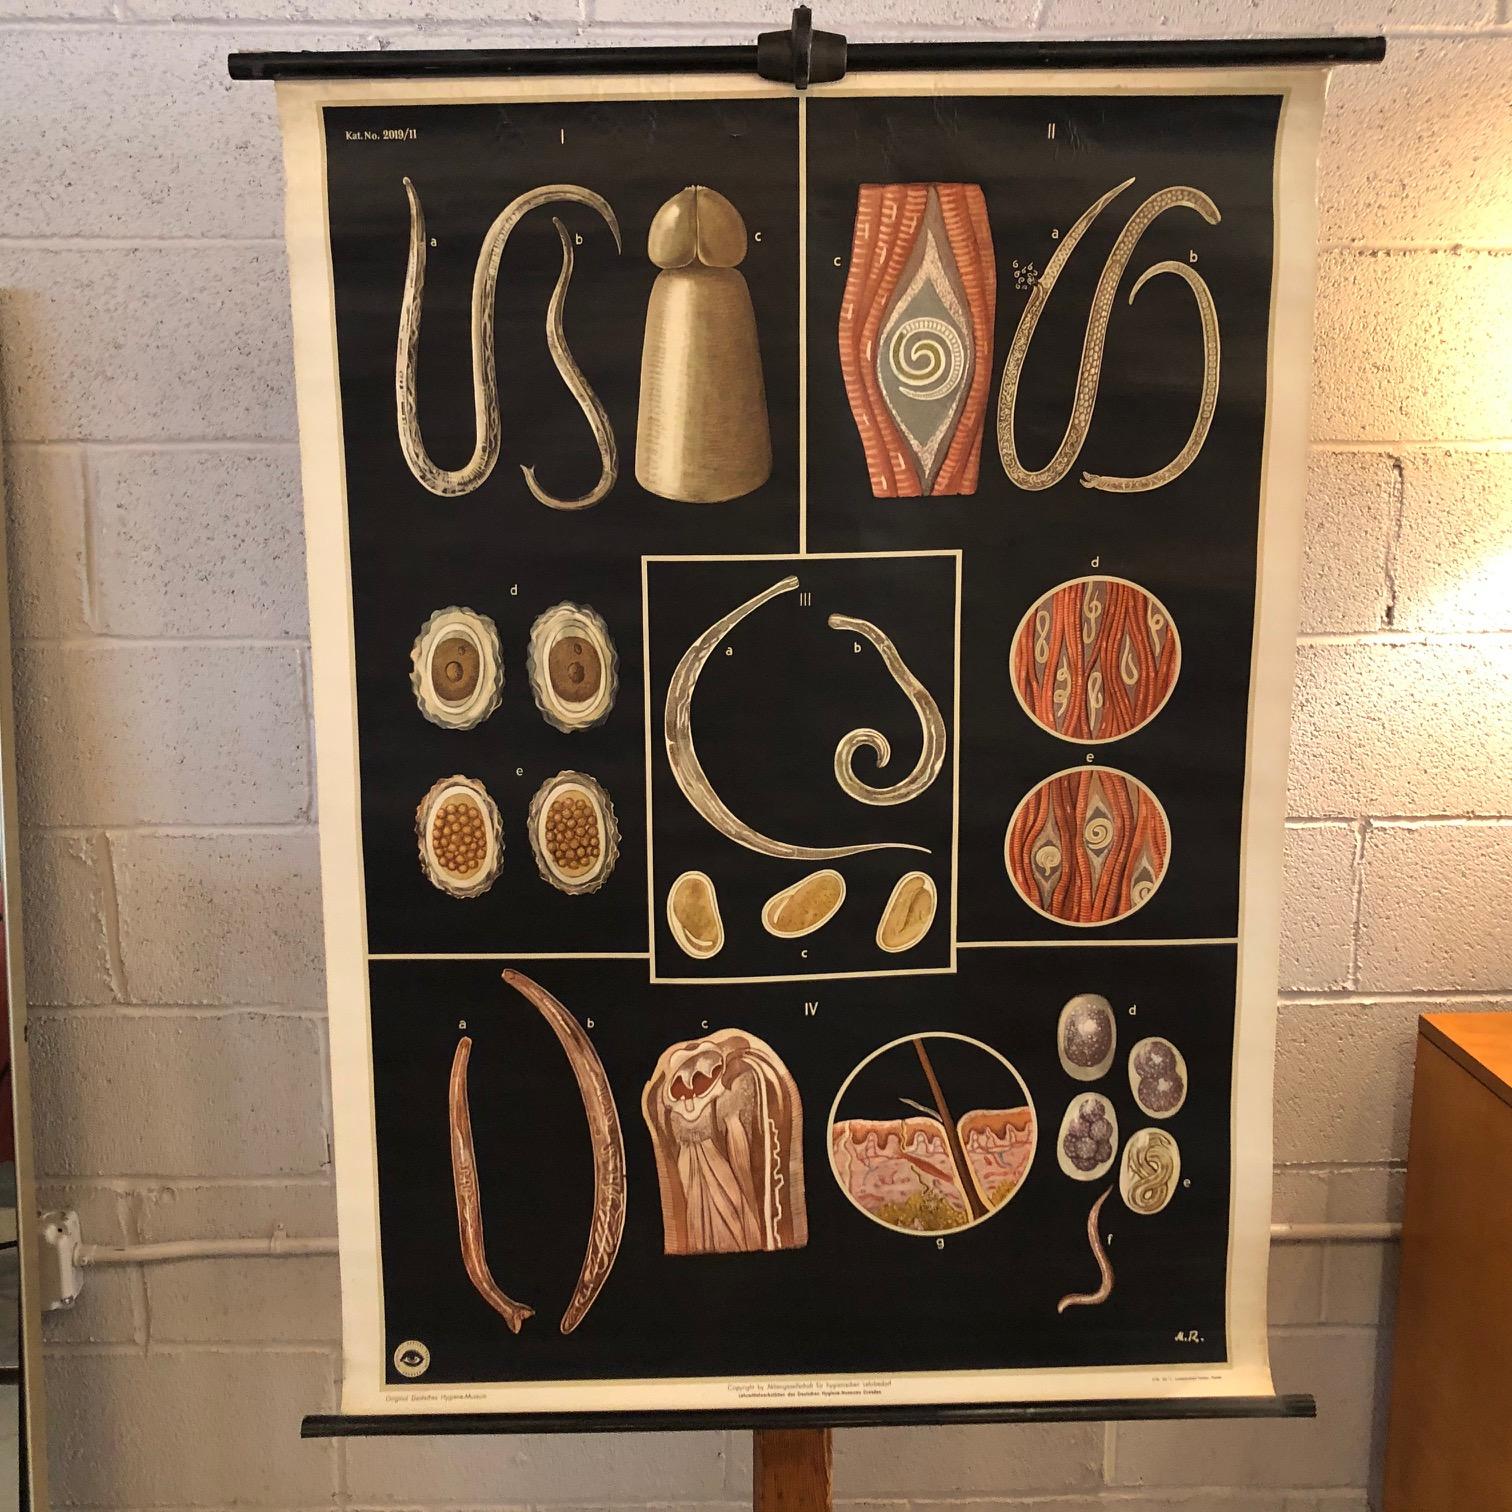 German, educational, biology, roll-up chart depicting parasitic worms by Jung Koch Quentell, from the Deutsches Hygiene Museum is printed on canvas backed paper with painted maple dowels and cotton string for hanging.